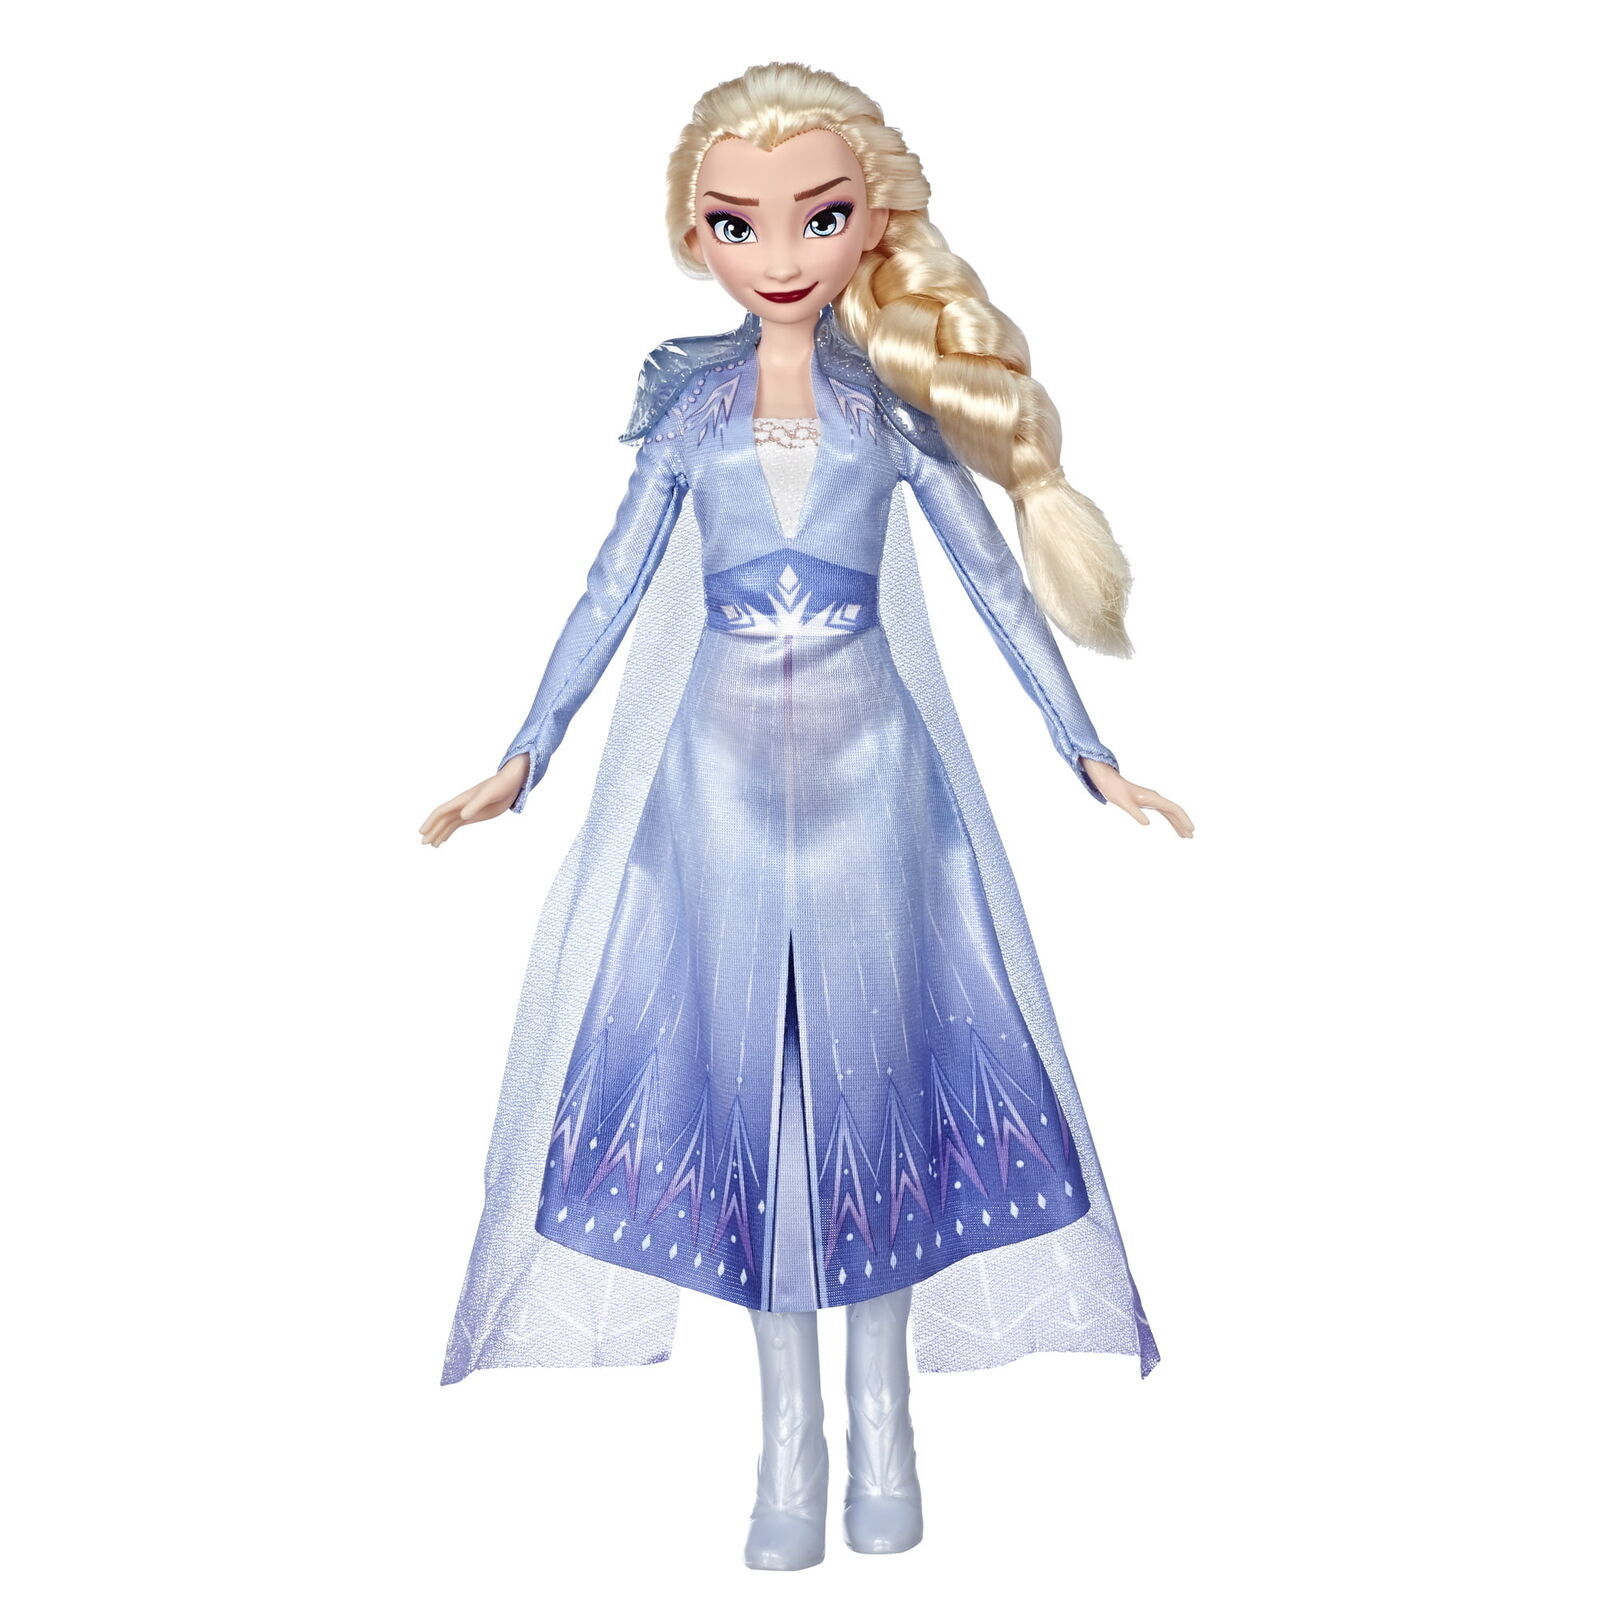 Primary image for Disney Frozen 2 Elsa Fashion Doll with Long Blonde Hair, Includes Blue Outfit